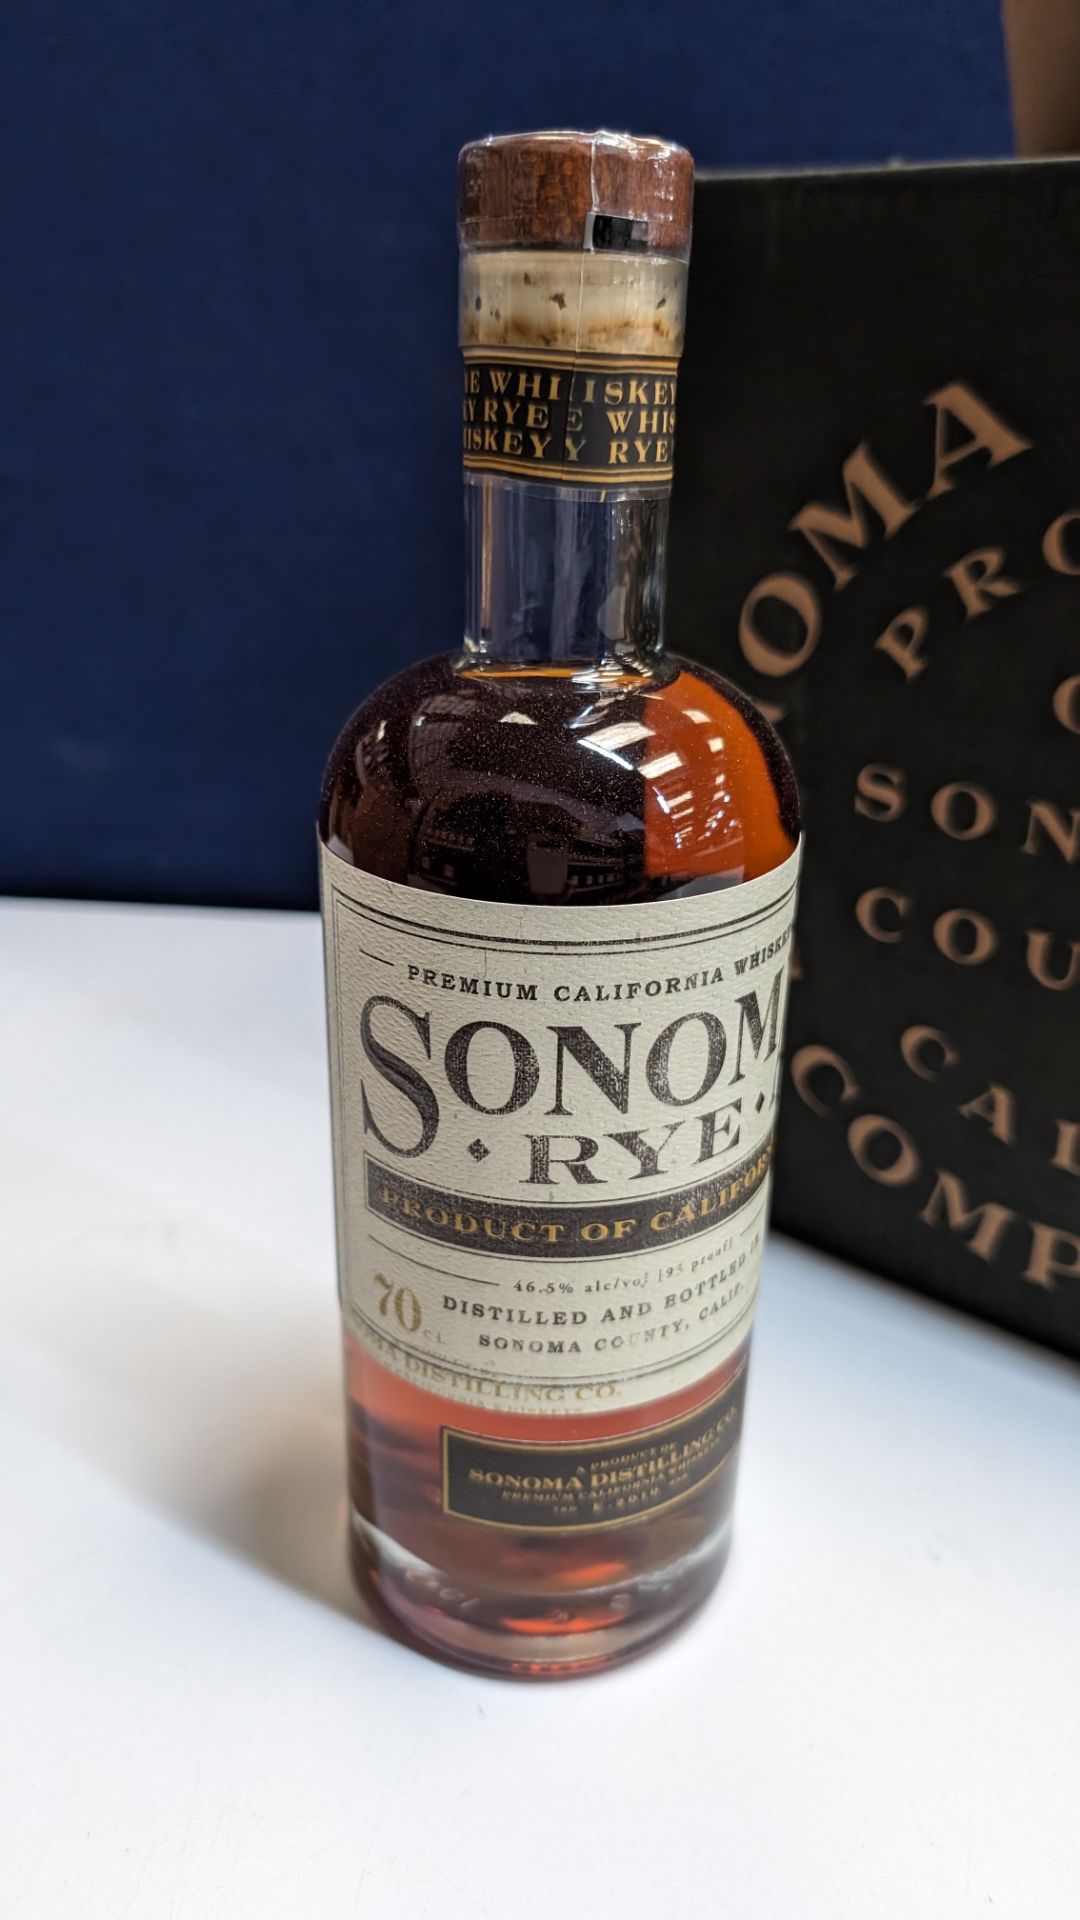 6 off 700ml bottles of Sonoma Rye Whiskey. In Sonoma branded box which includes bottling details on - Image 3 of 8